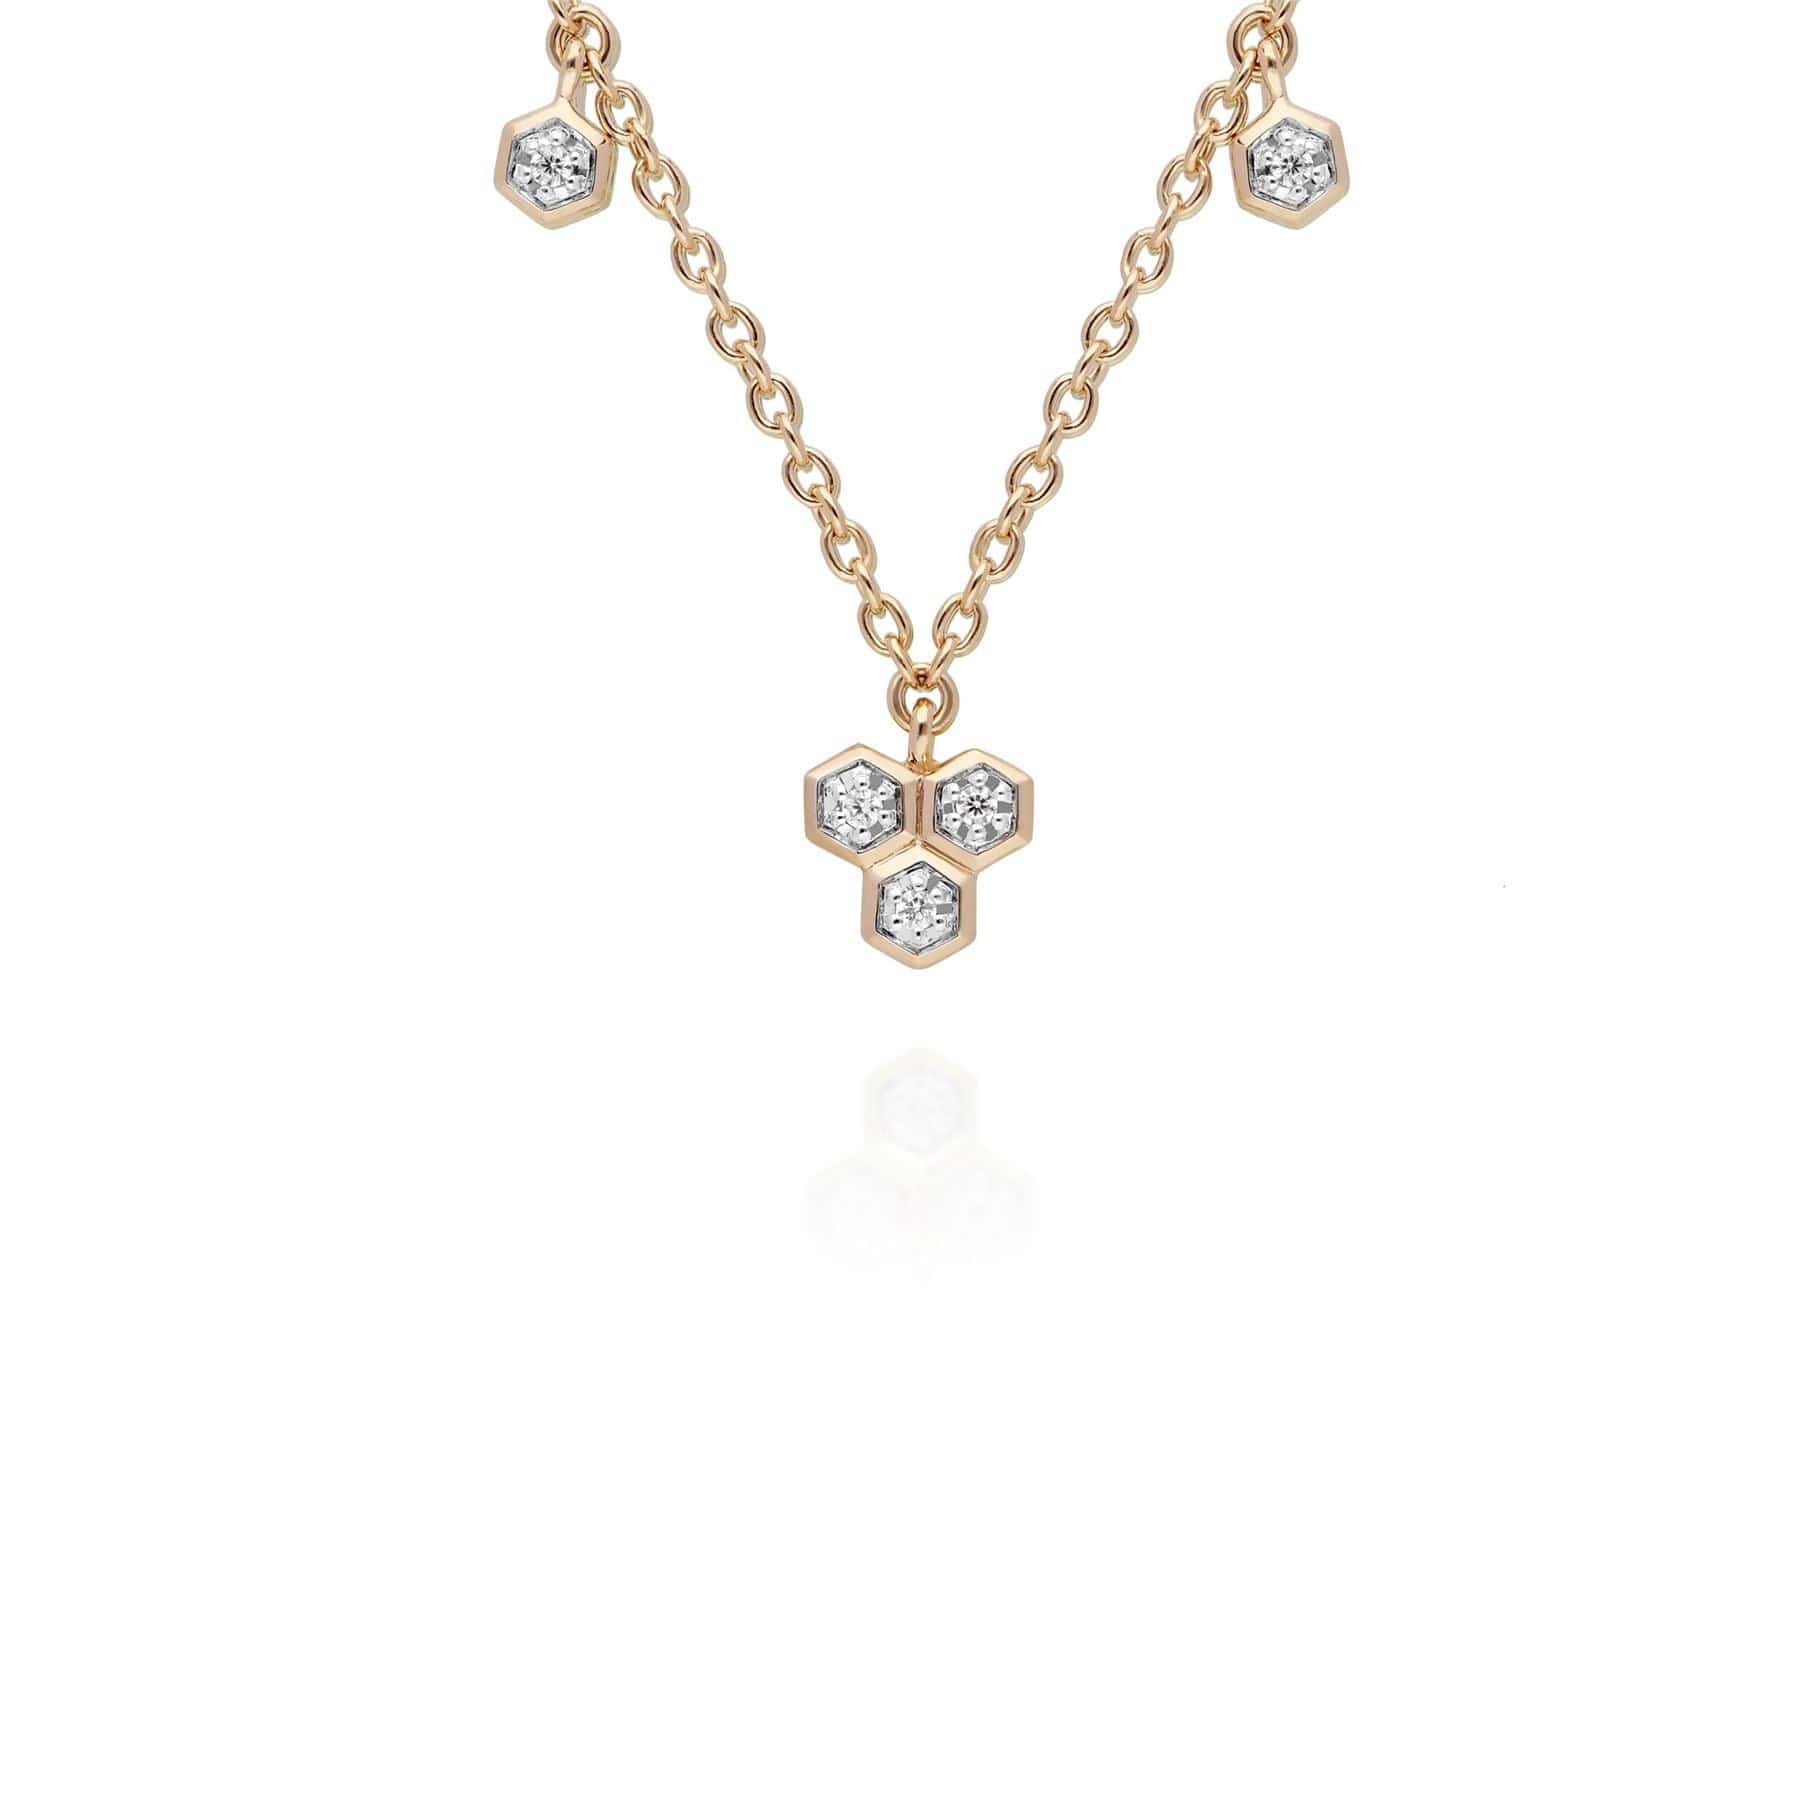 Trilogy diamond necklace on 9ct yellow gold chain